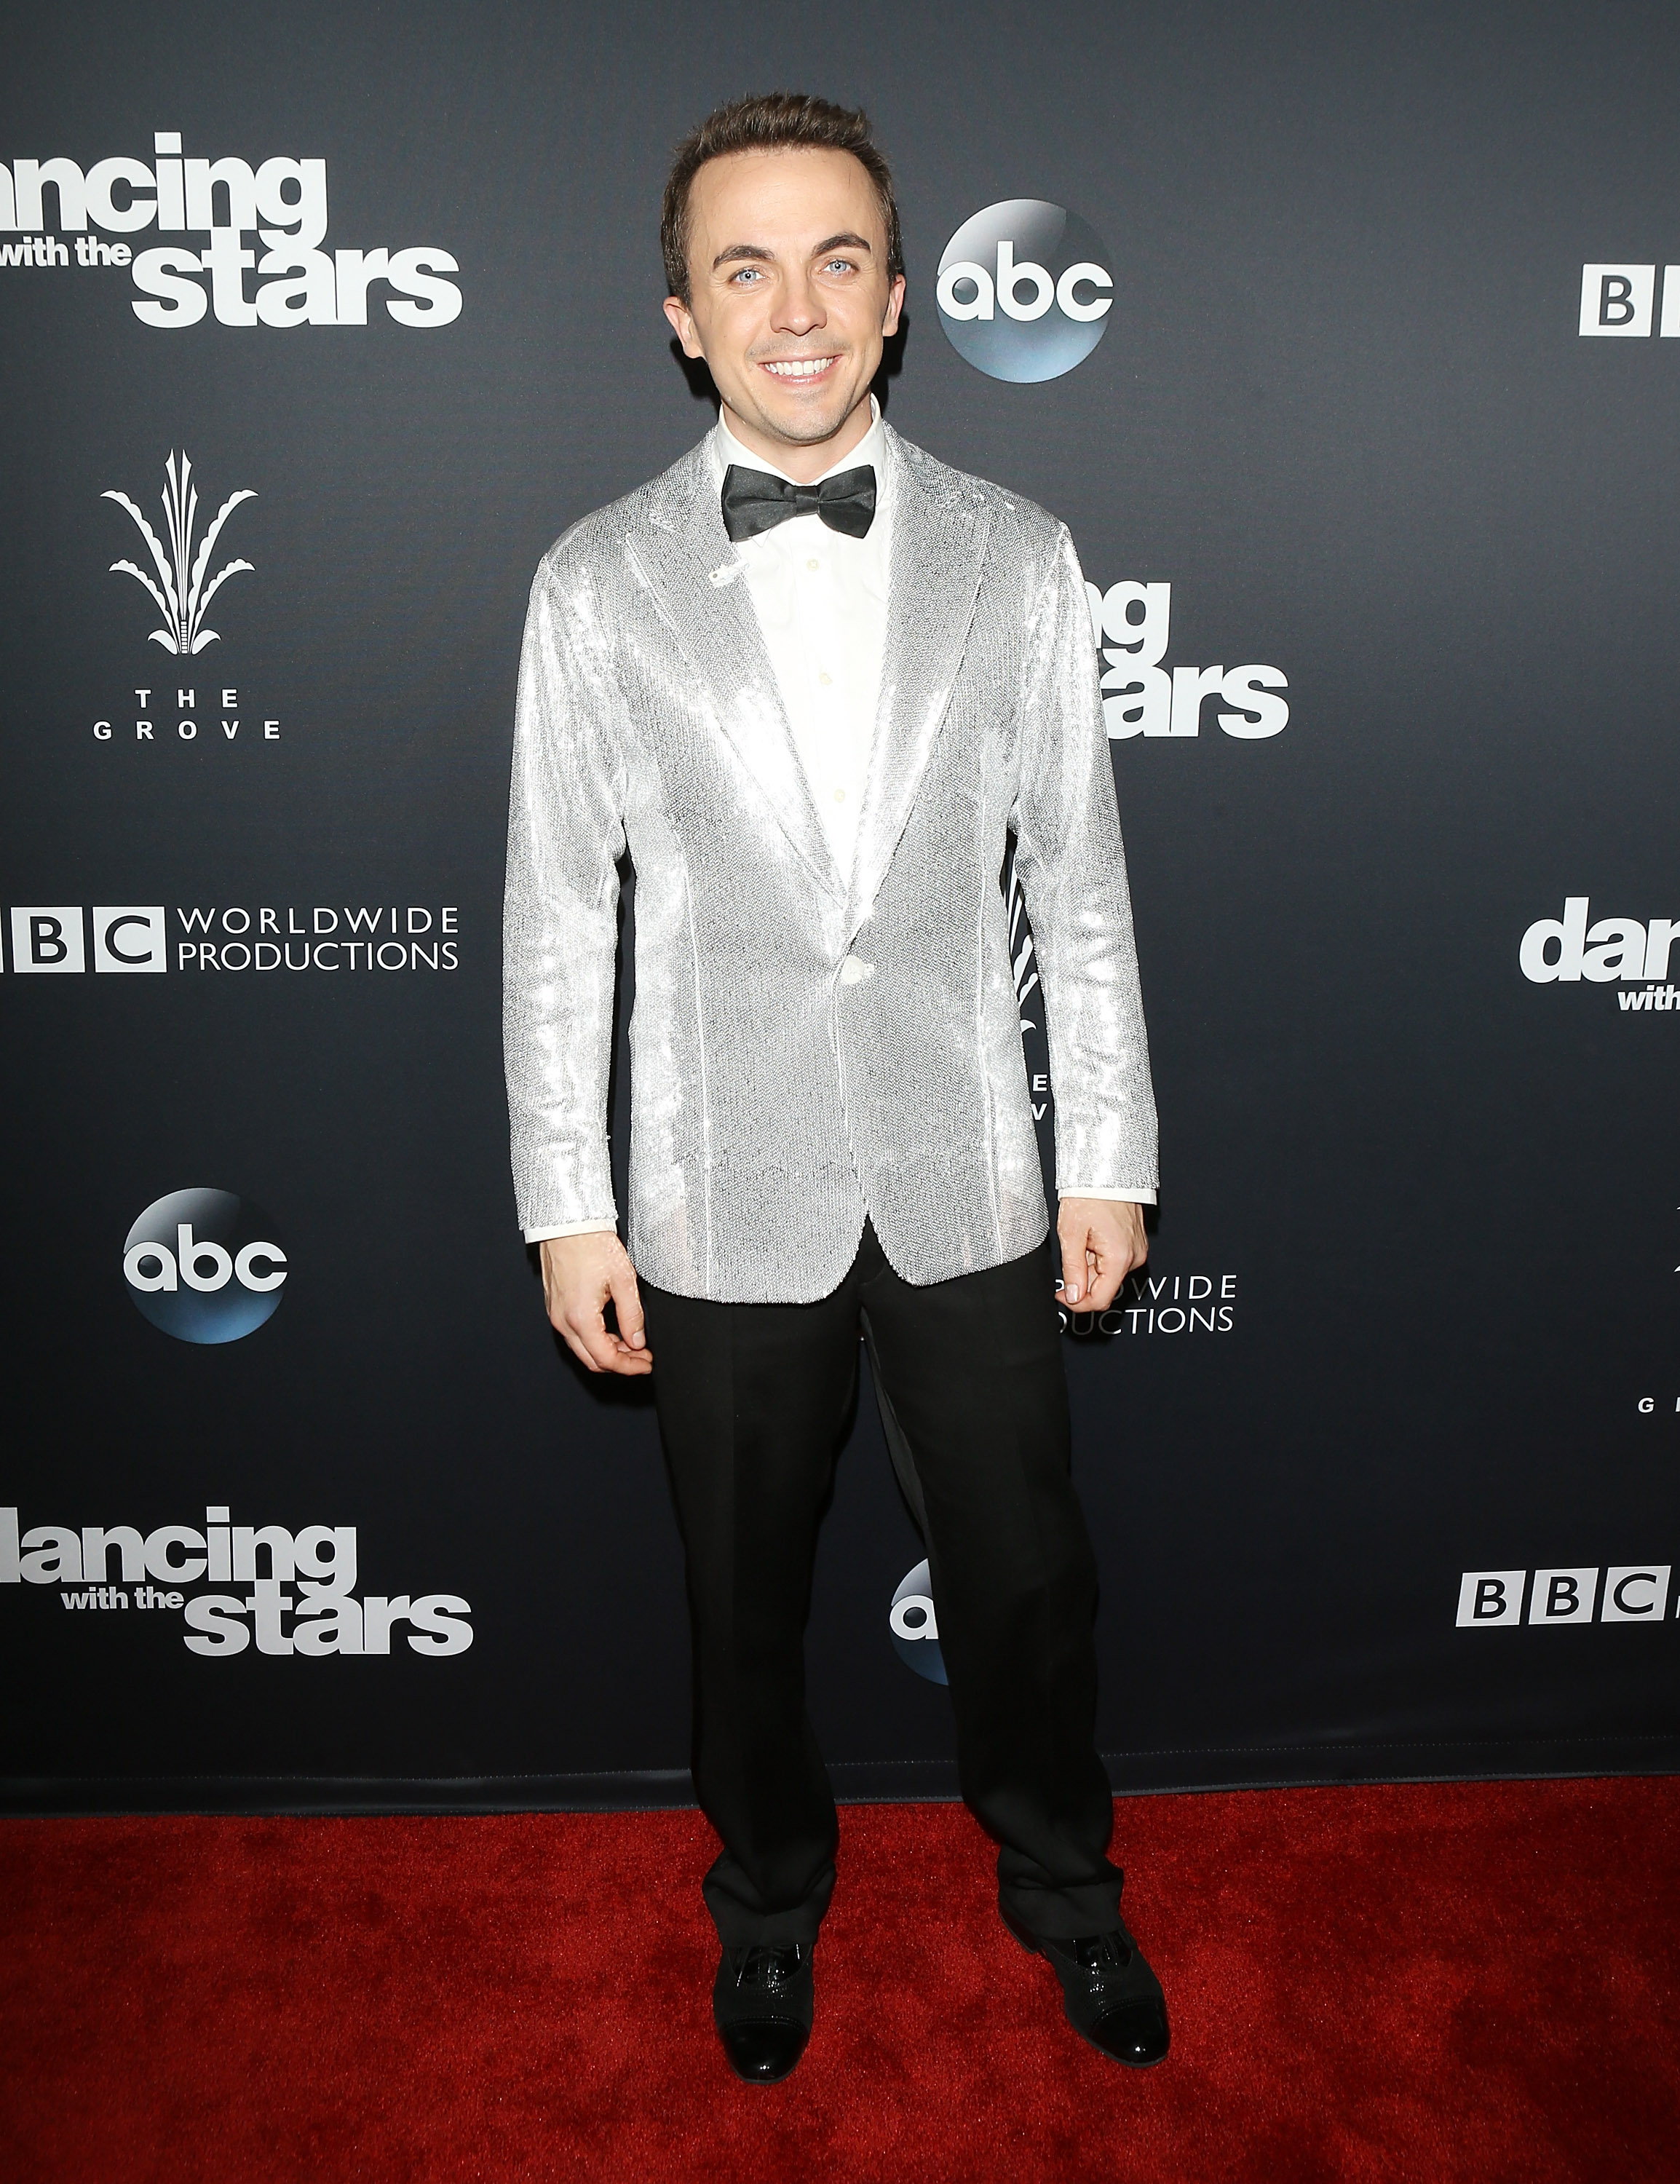 Frankie Muniz during season 25 of ABC's "Dancing With the Stars" on November 21, 2017 in Los Angeles, California | Source: Getty Images